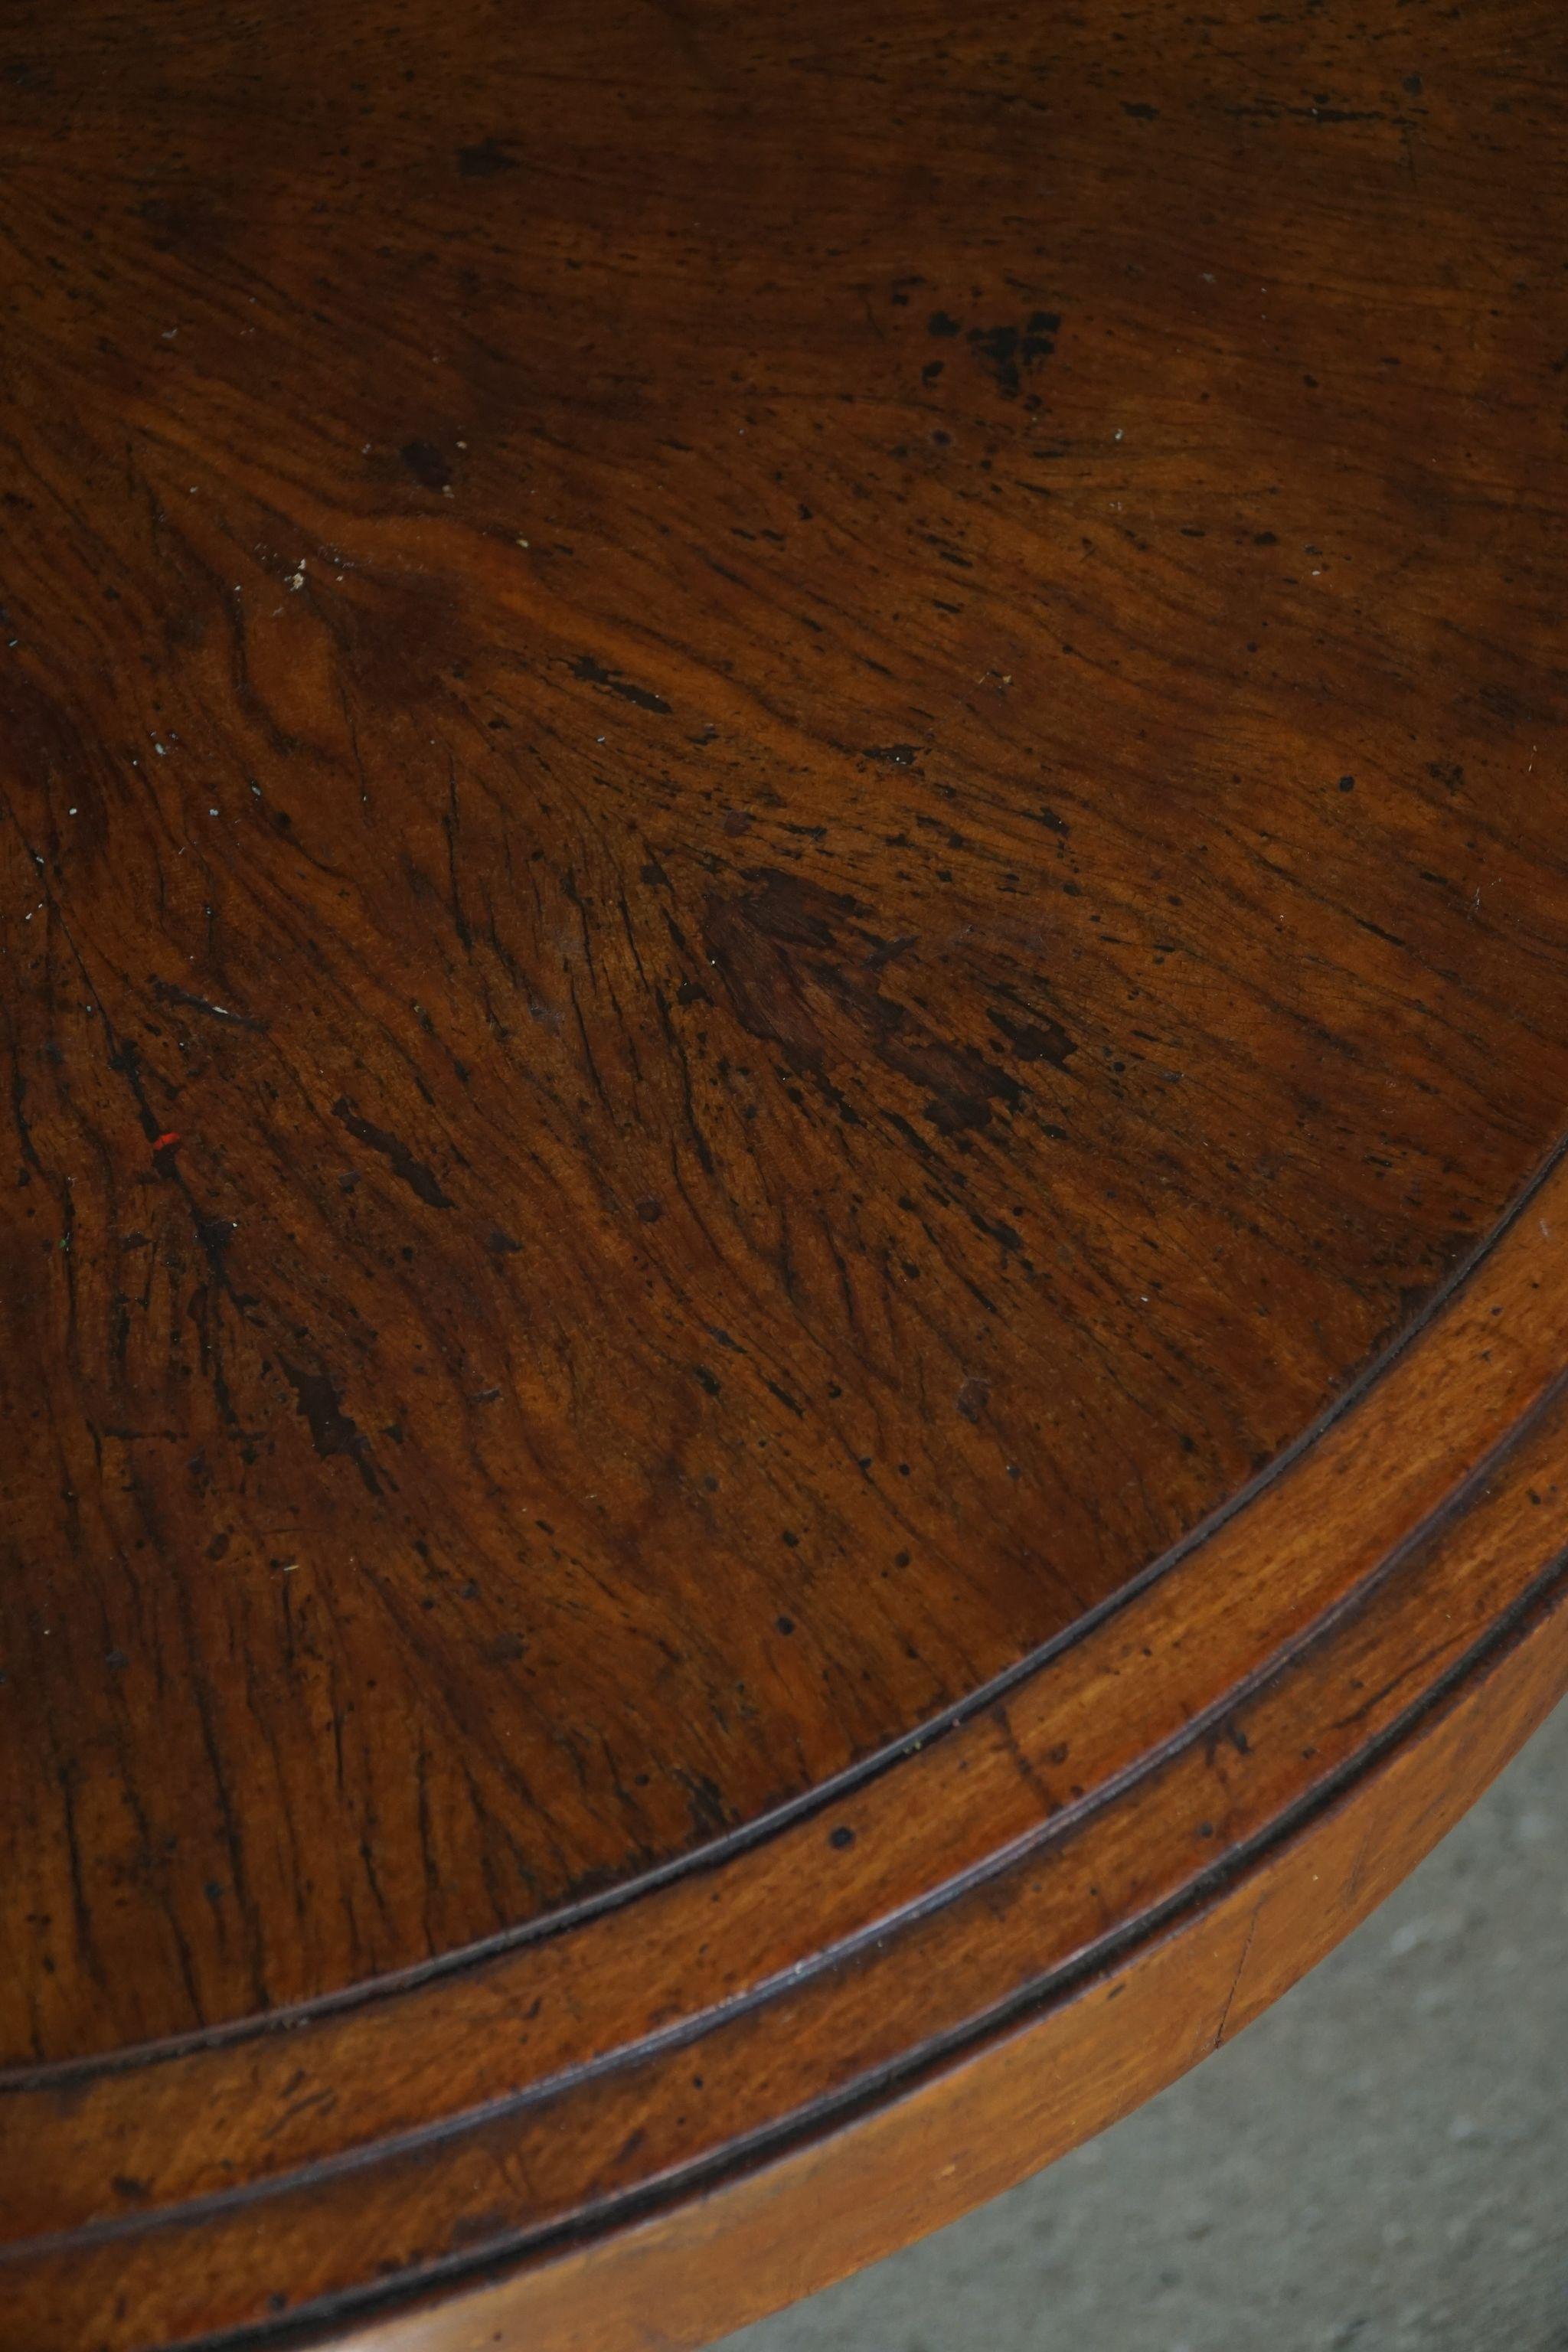 Art Deco, Large Round Sofa Table in Walnut, By a Danish Cabinetmaker, 1930s For Sale 6